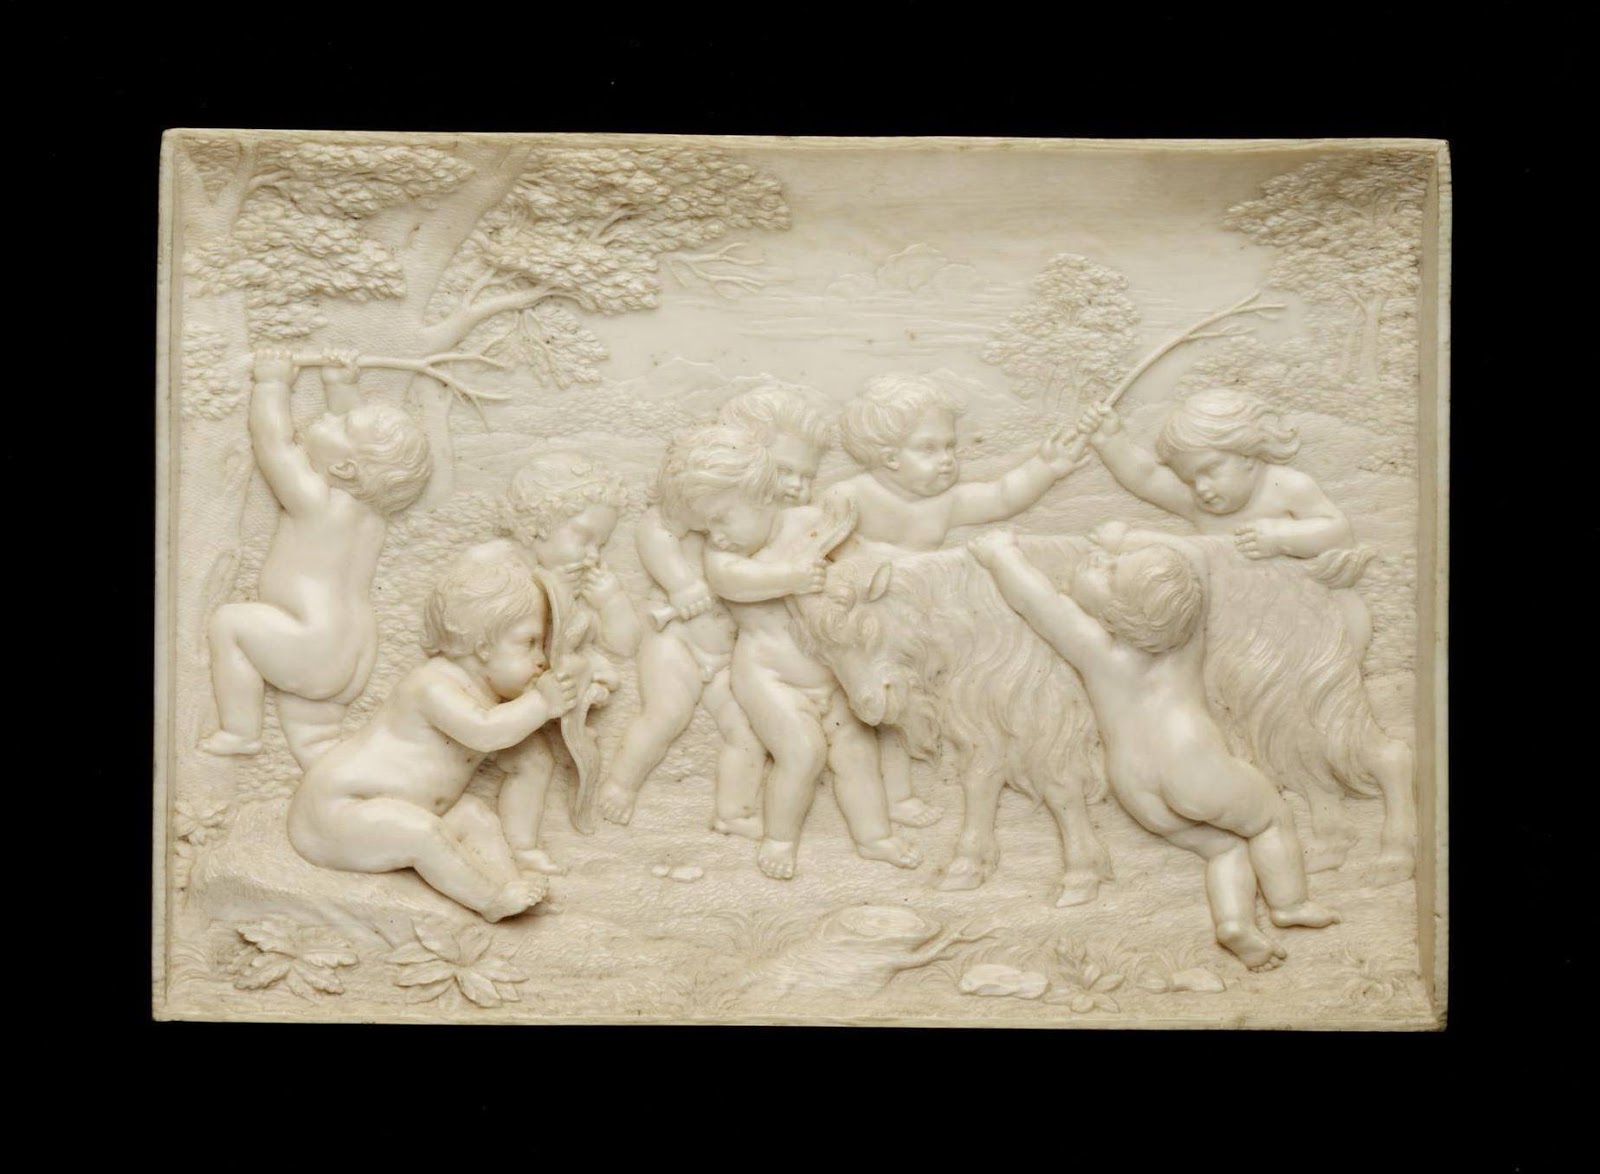 Duquesnoy-François-Bacchanalian-infants-playing-with-a-goat-c1650-70-ivory-relief-V&A-Flemish.jpg